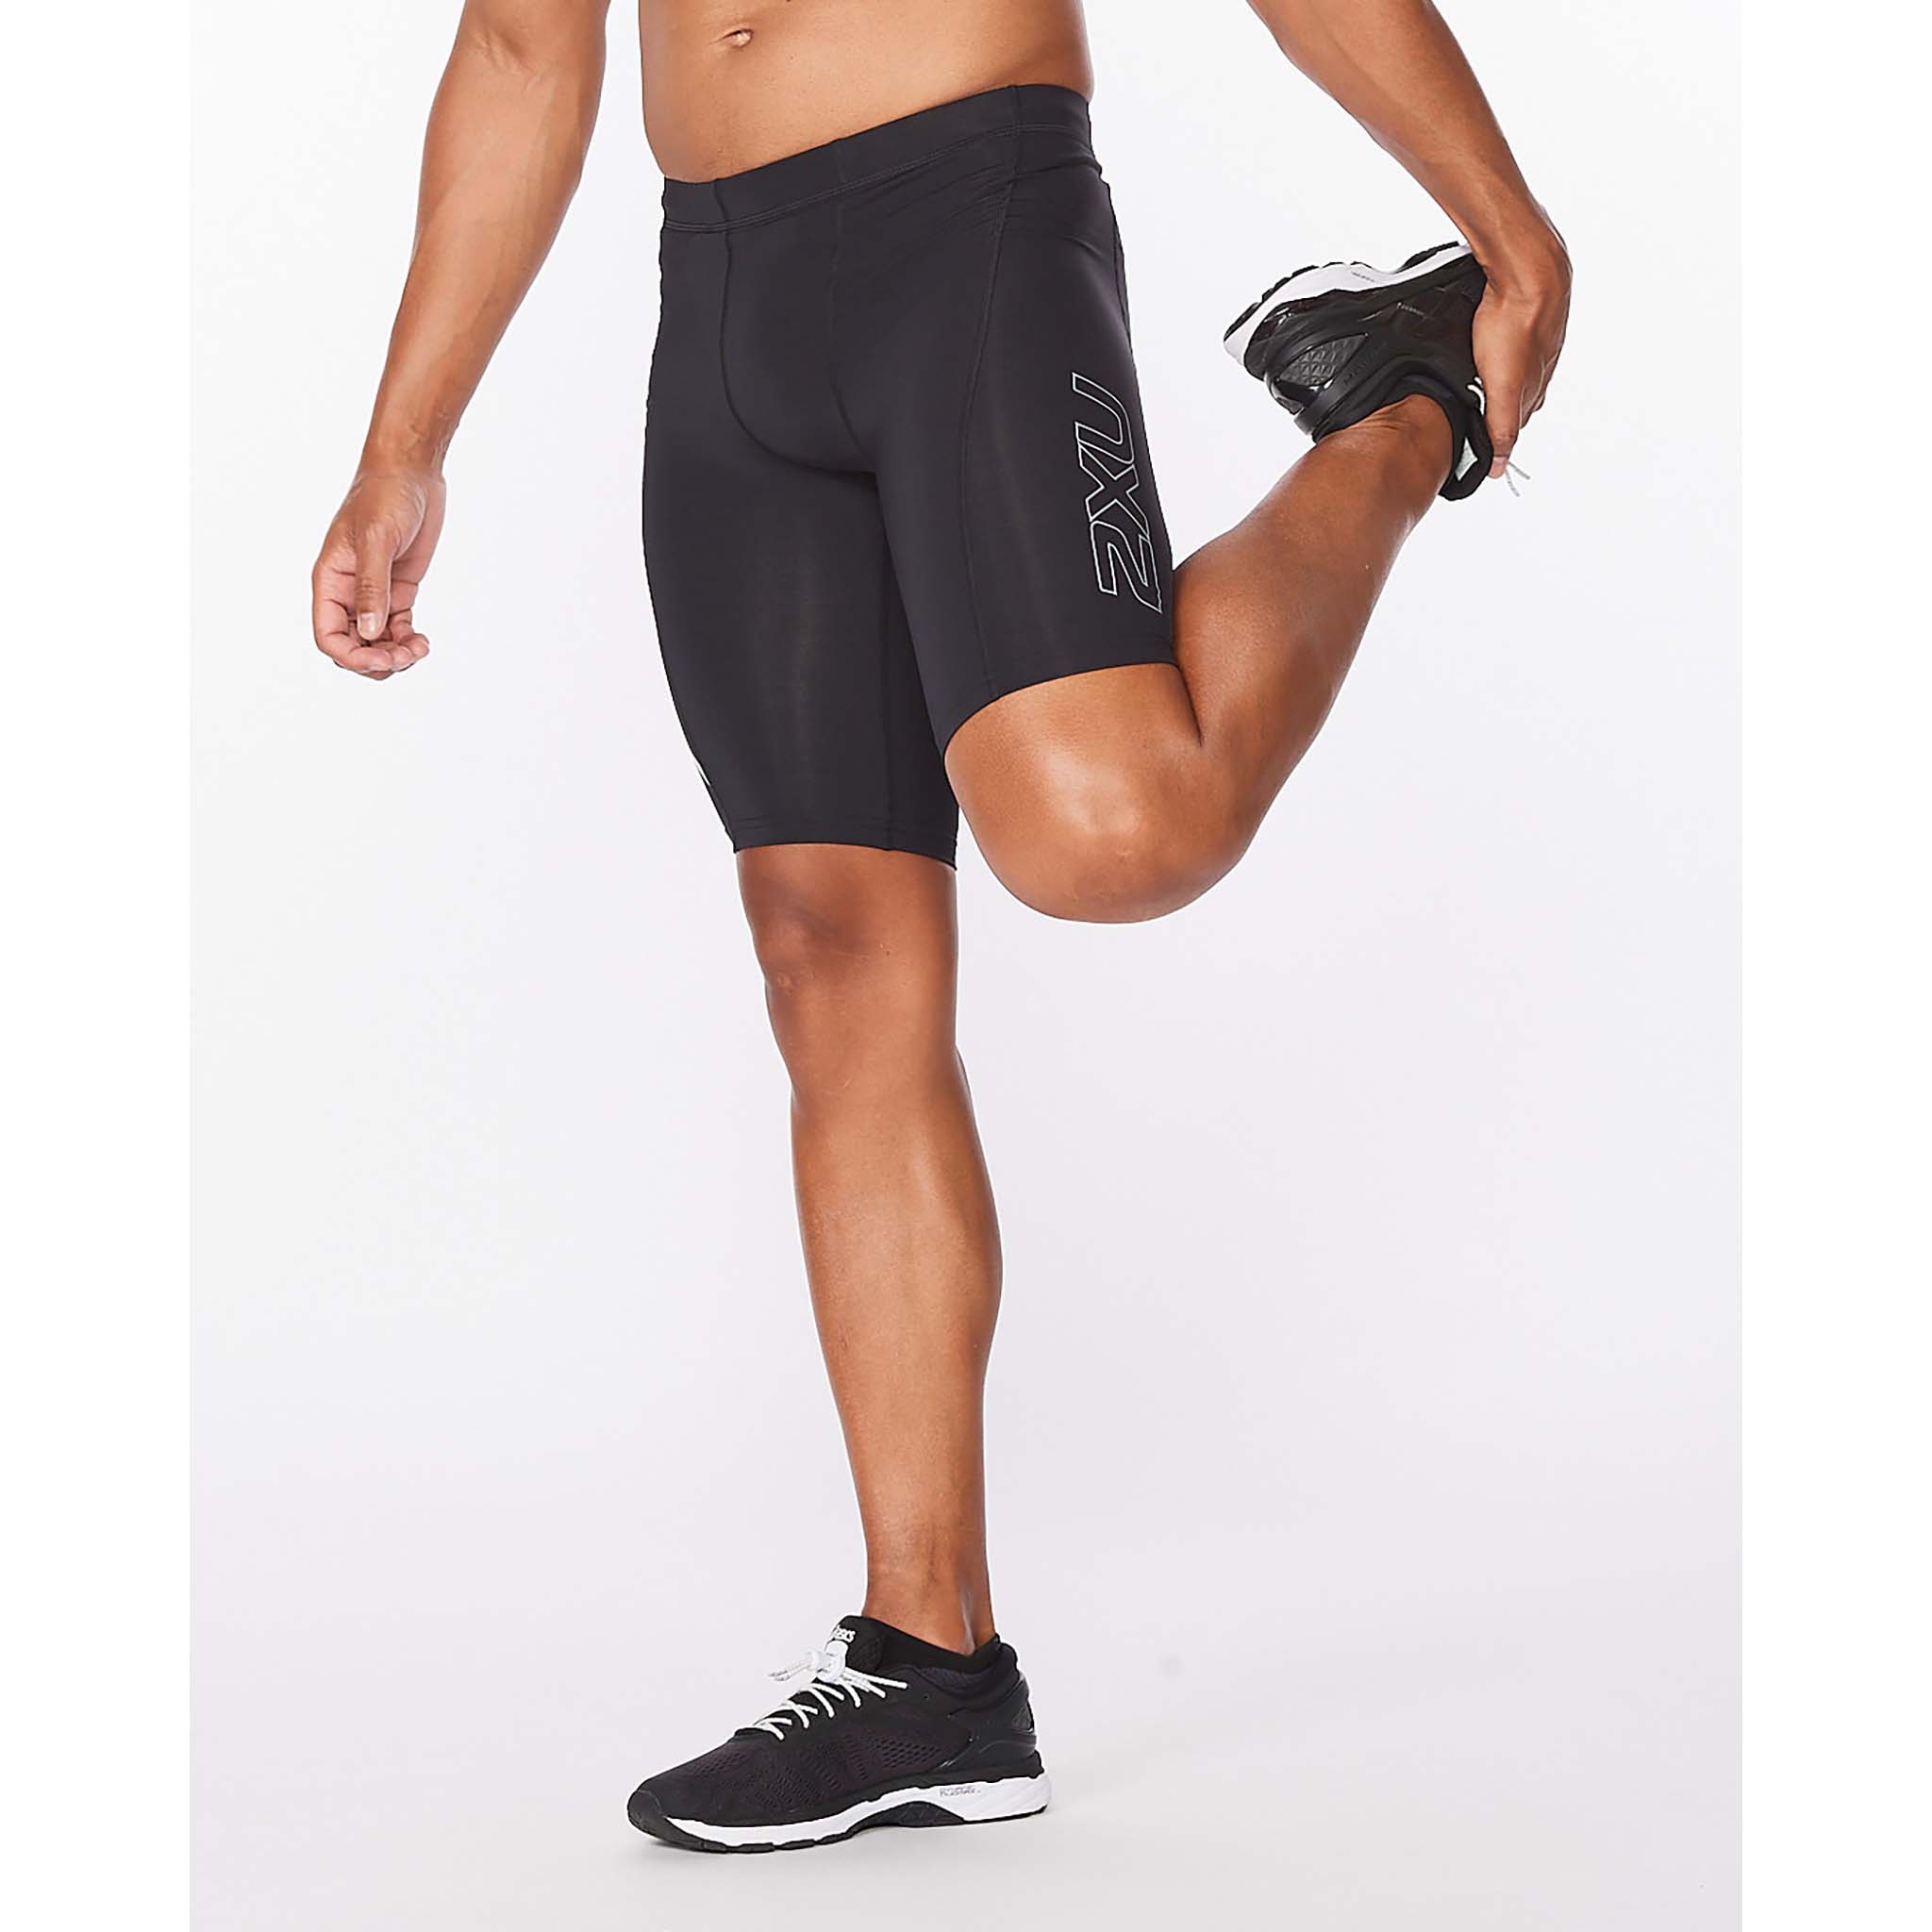 Cuissard pour le running avec compression aero homme 2XU